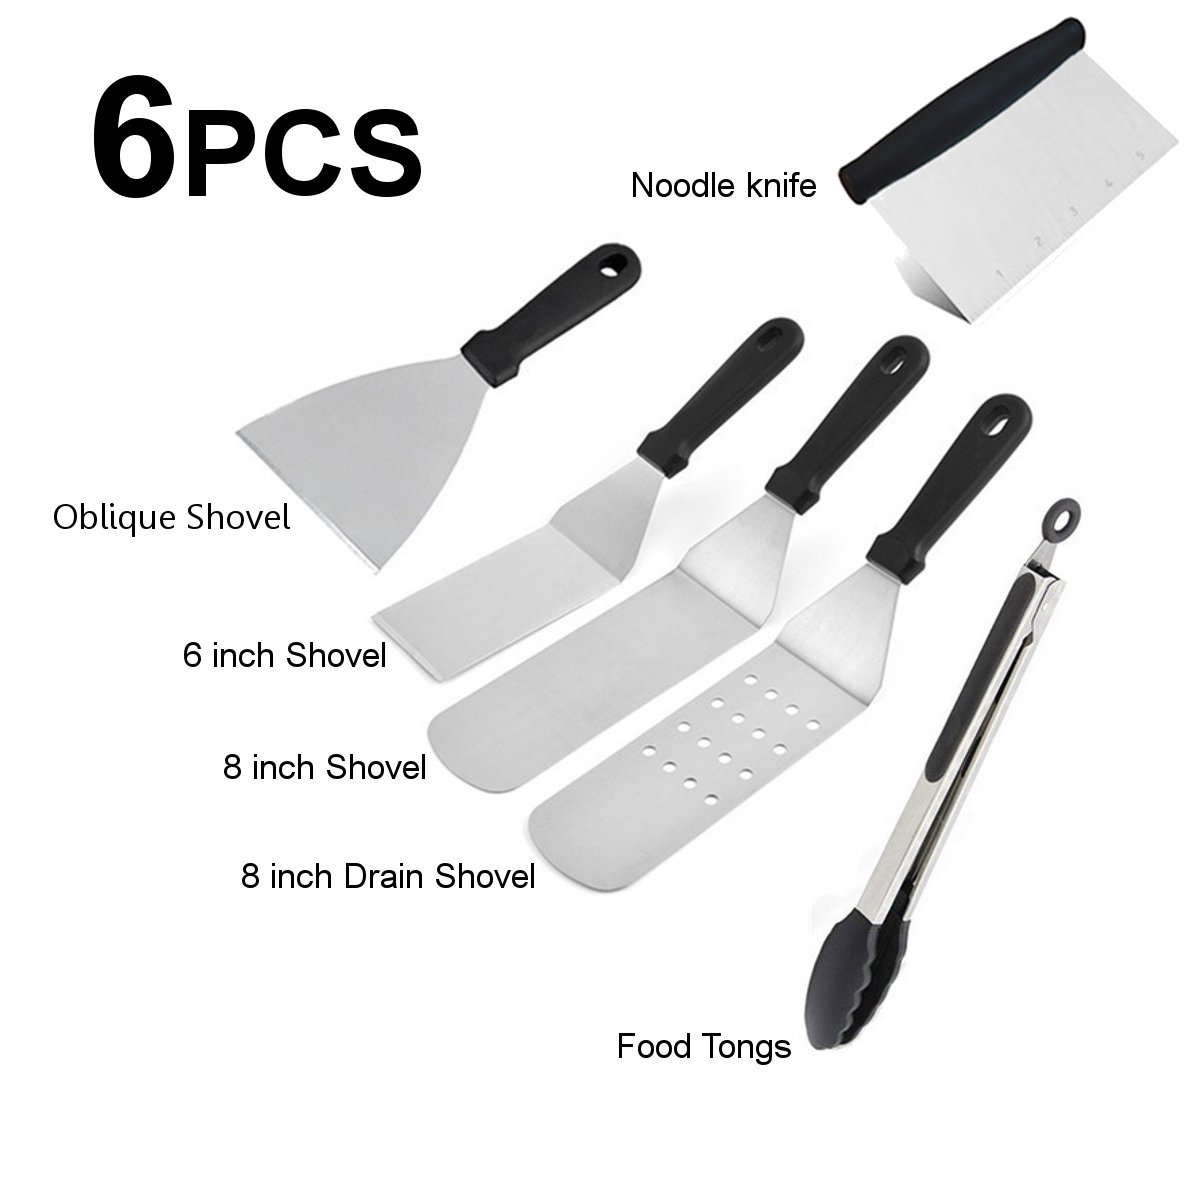 6PCS BBQ Grilling Accessories Stainless Steel Barbecue Tools Kit,  Grill Utensil Tools Set BBQ Grill Tools Set for Backyard Party, Tailgating, Camping - image 3 of 5